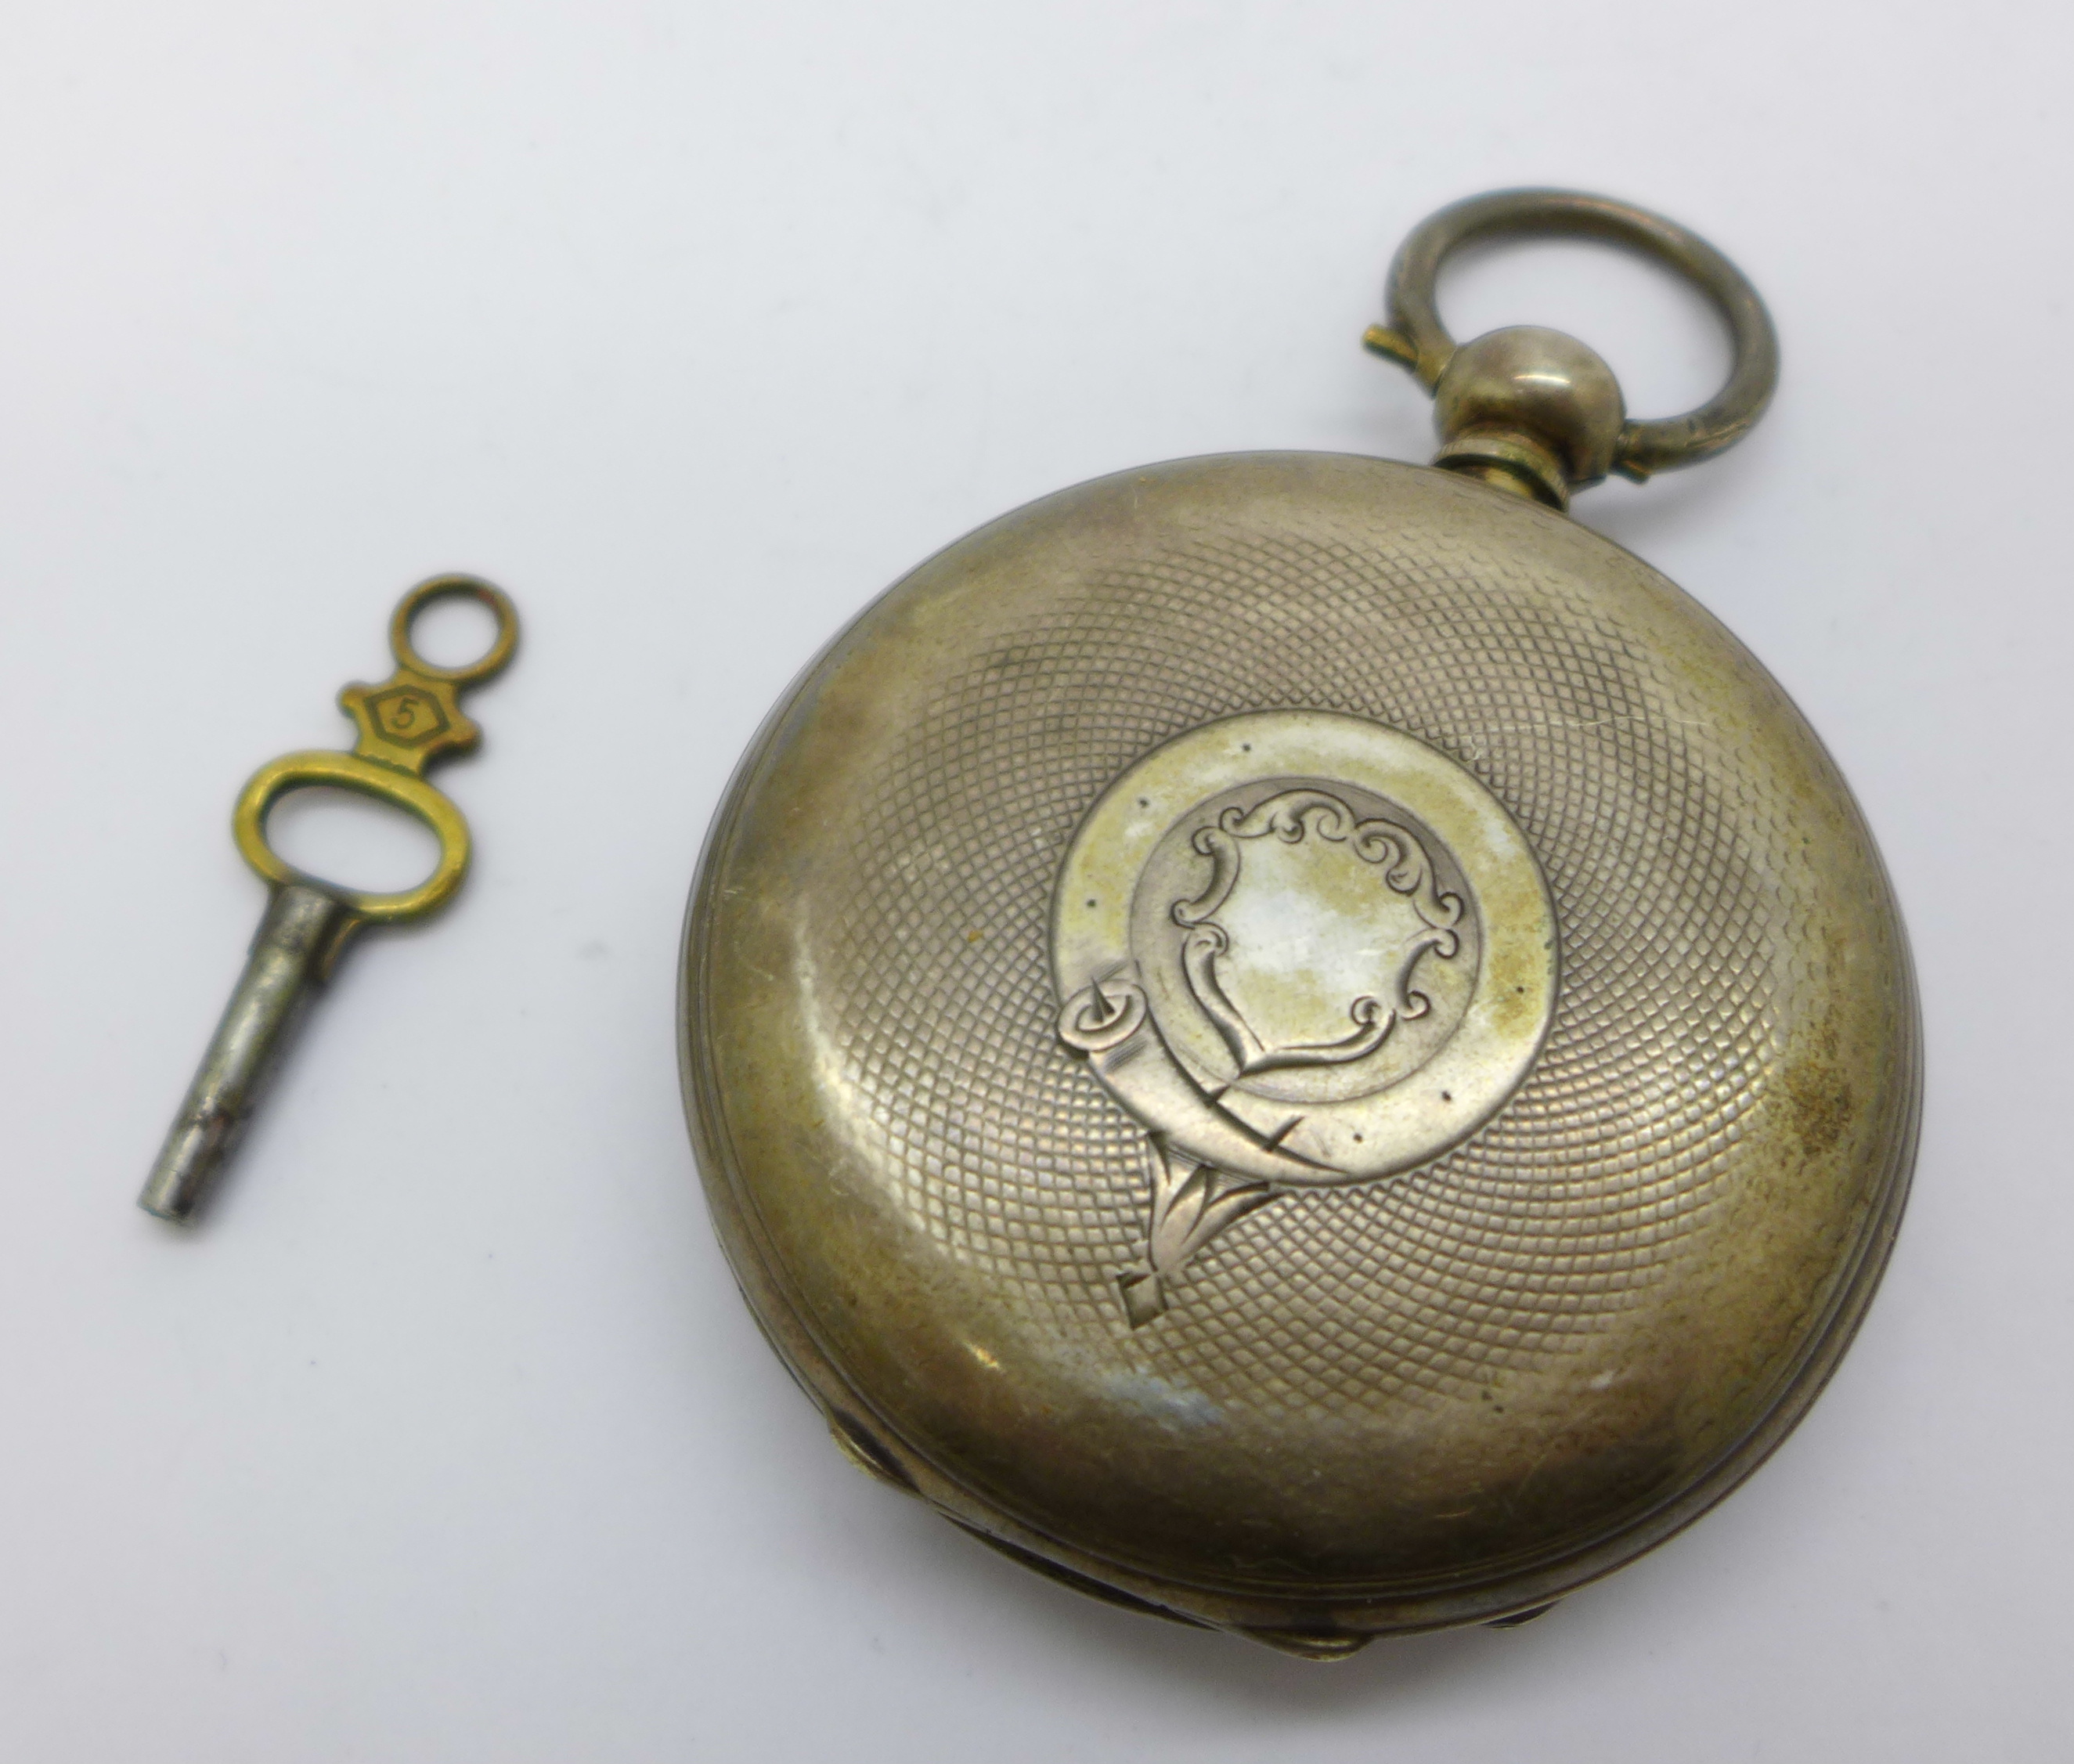 A silver pocket watch with silver dial and key - Image 2 of 2